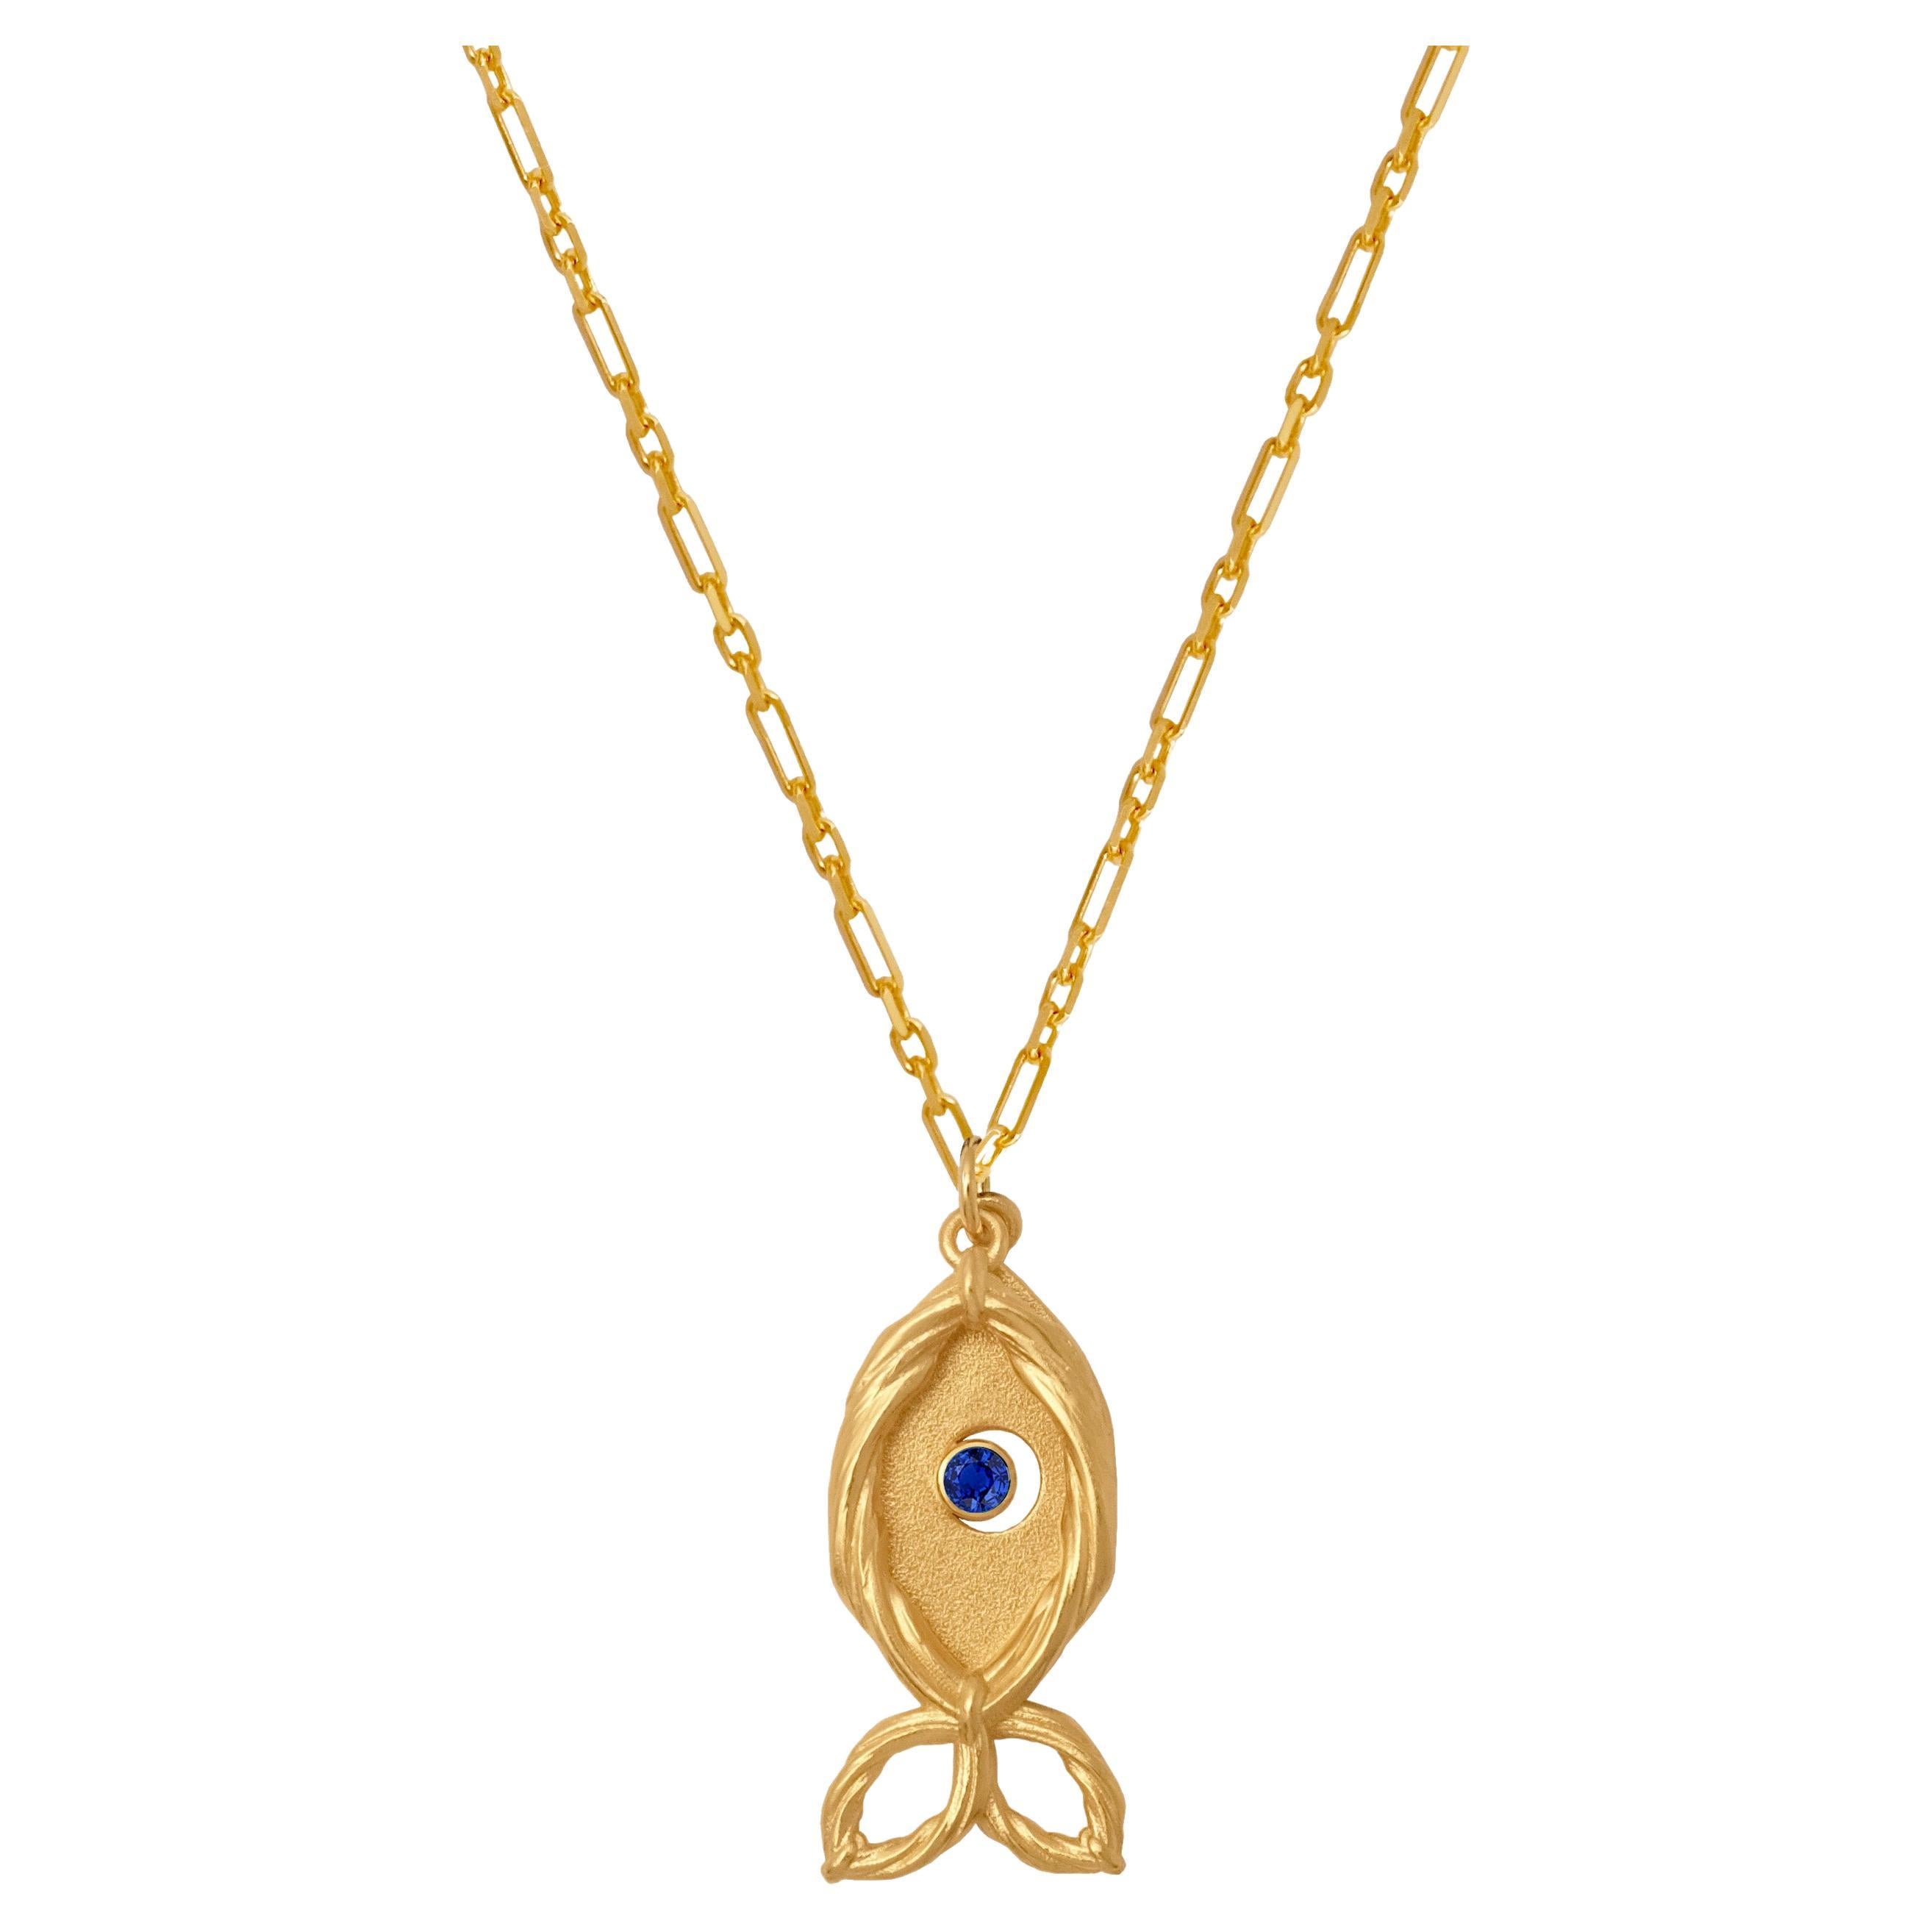 Evil Eye Repeller Fish Necklace with Sapphire